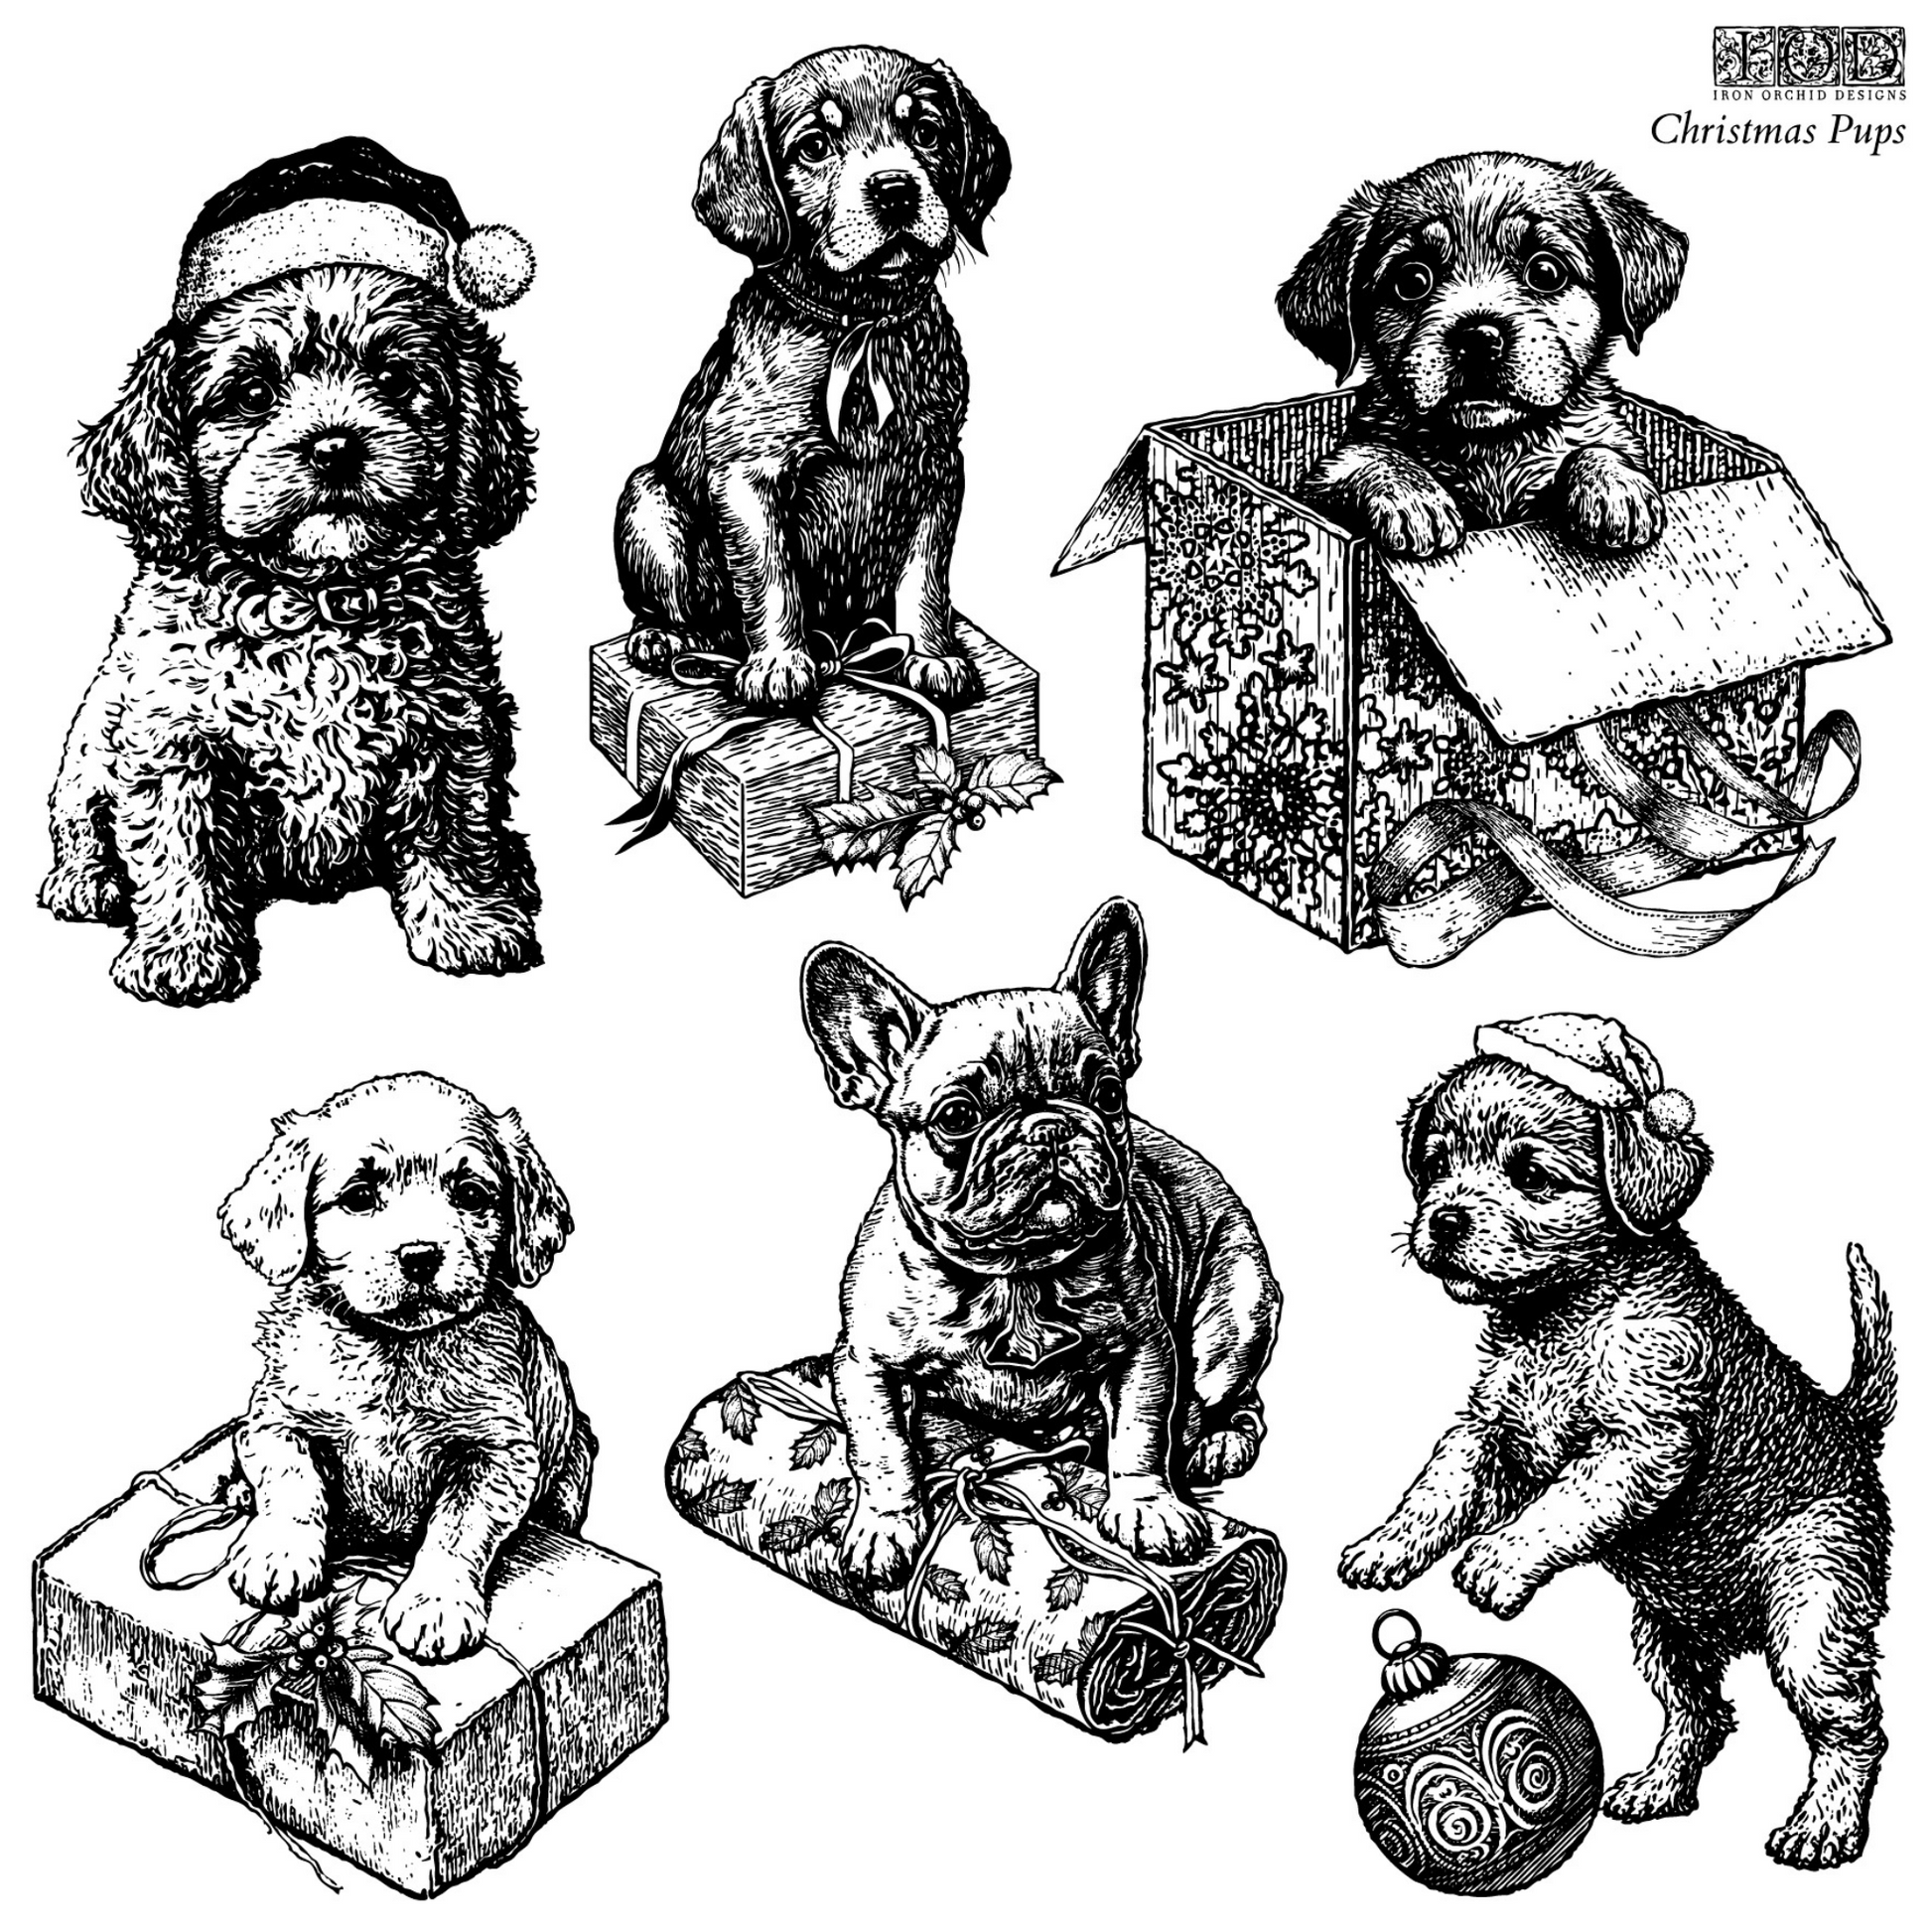 "Christmas Pups" IOD Stamp by Iron Orchid Designs. Available at Milton's Daughter.